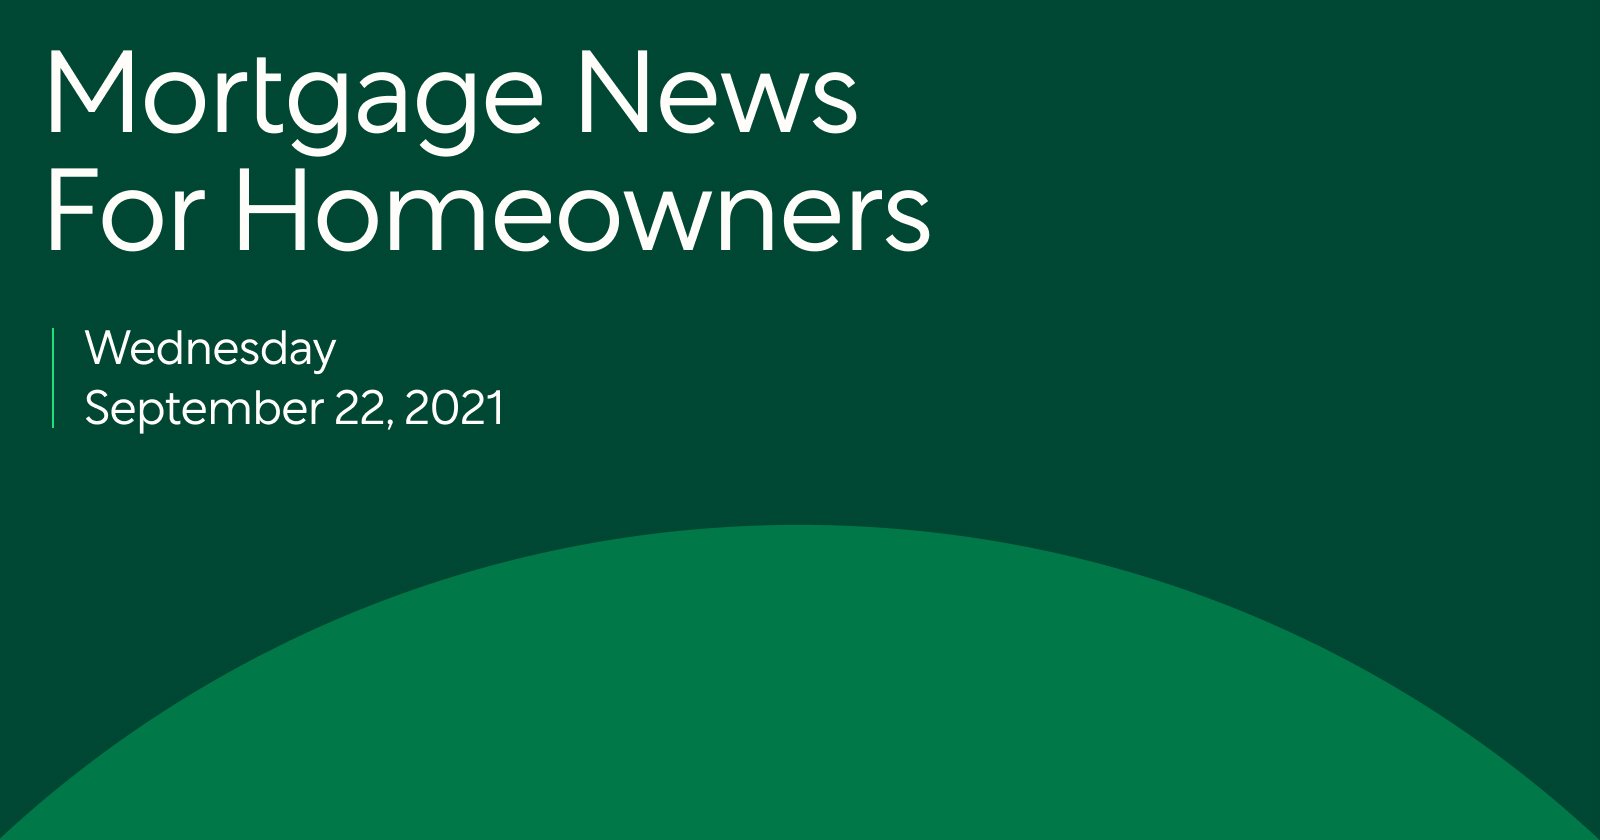 Mortgage News: Refinancing Could Save You $500 A Month